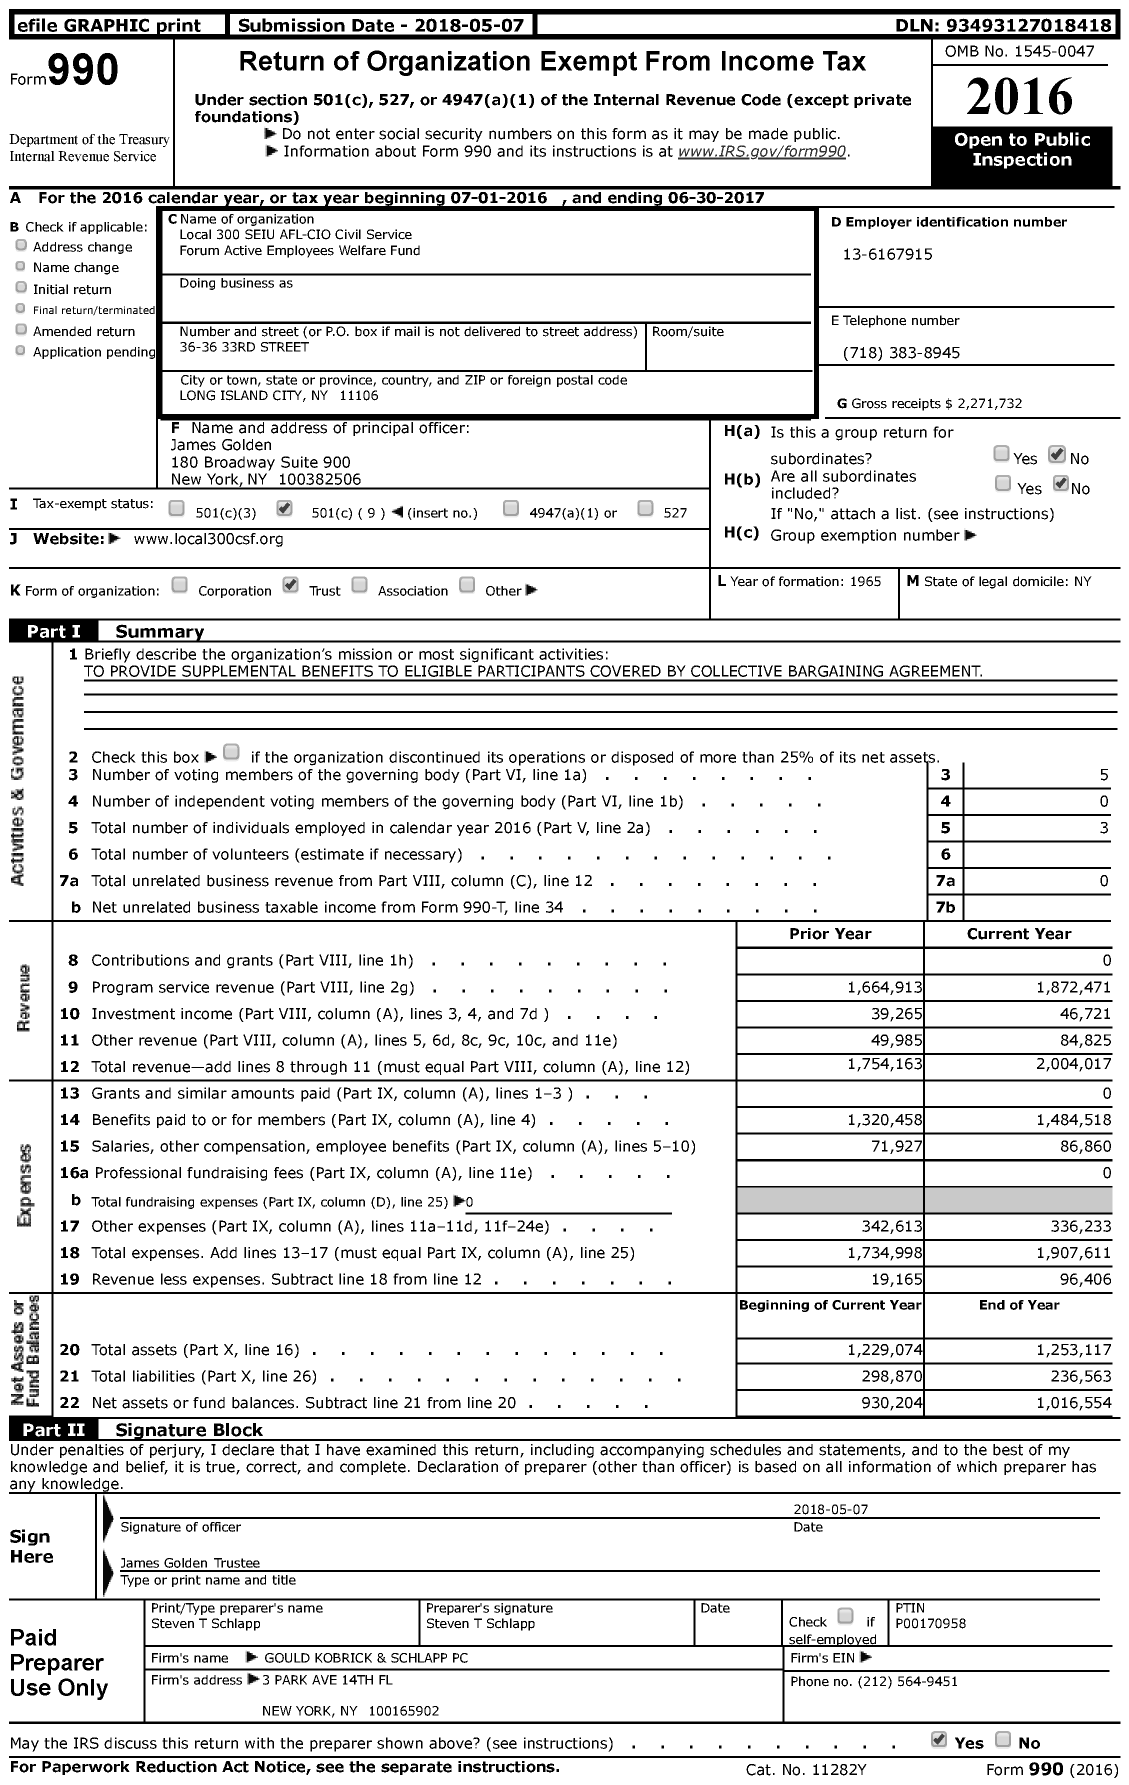 Image of first page of 2016 Form 990 for Local 300 SEIU AFL-CIO Civil Service Forum Active Employees Welfare Fund